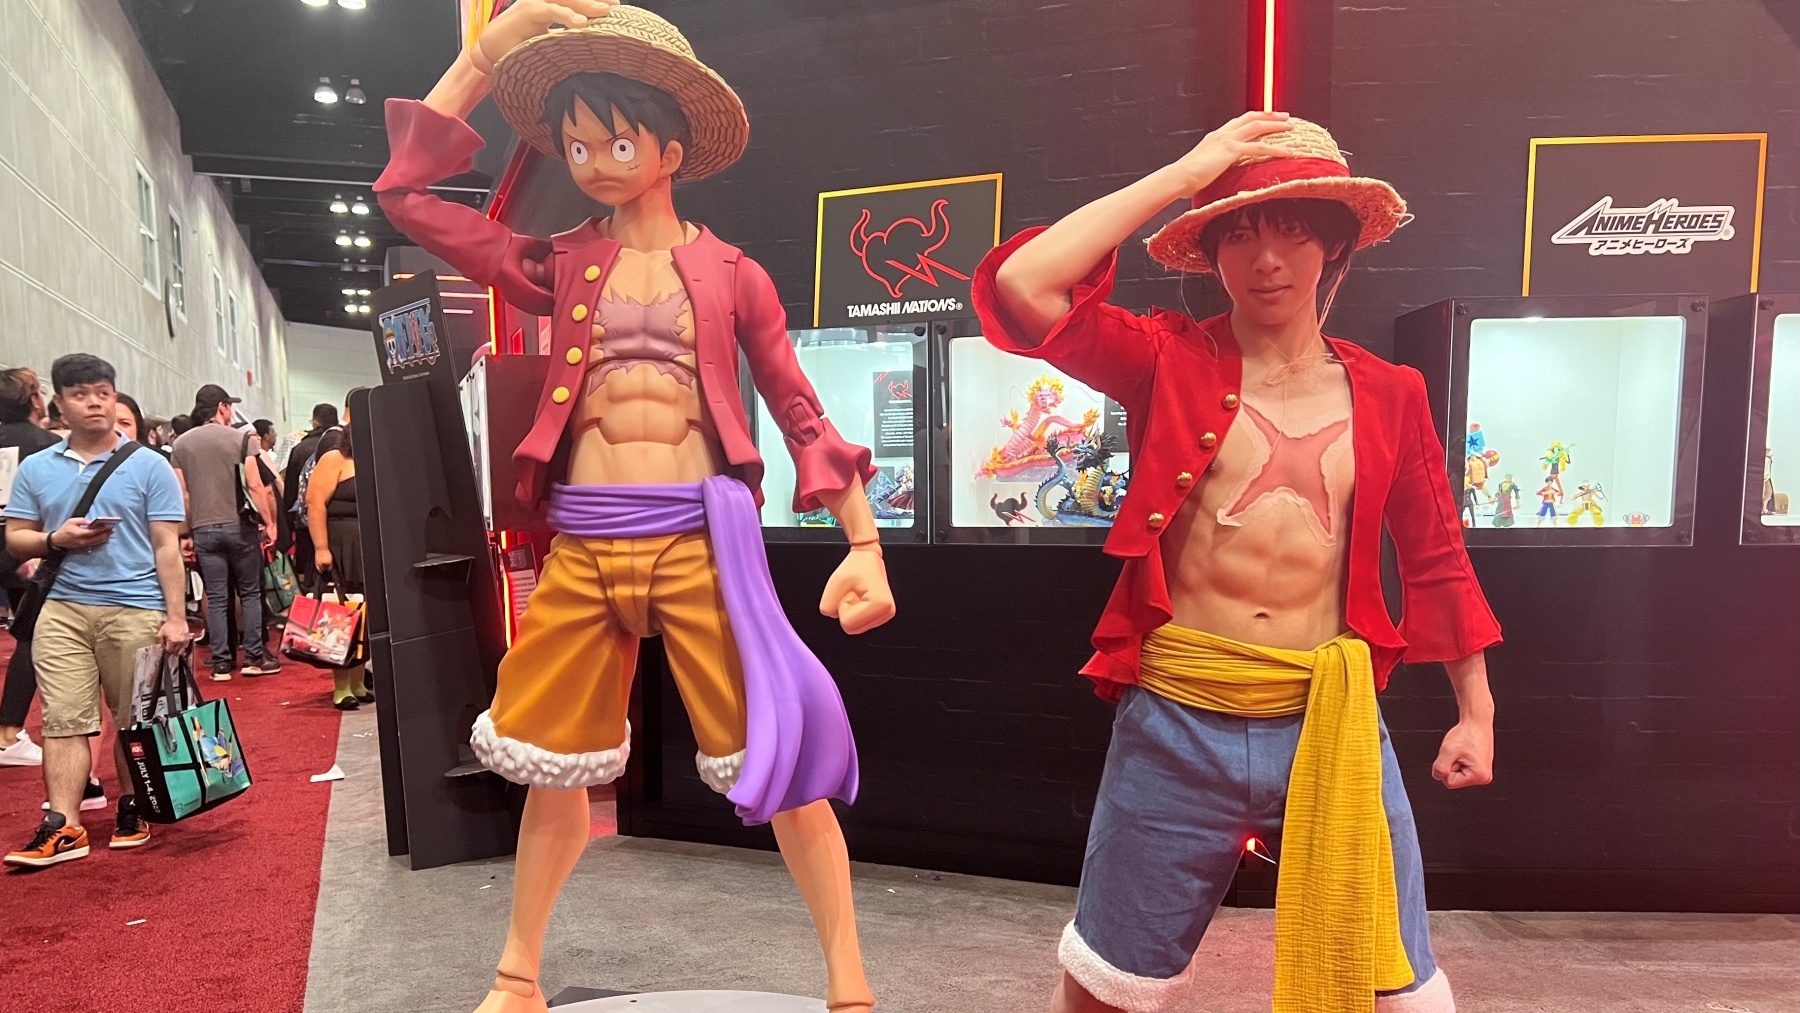 Slideshow: One Piece Cosplay at Anime Expo 2018